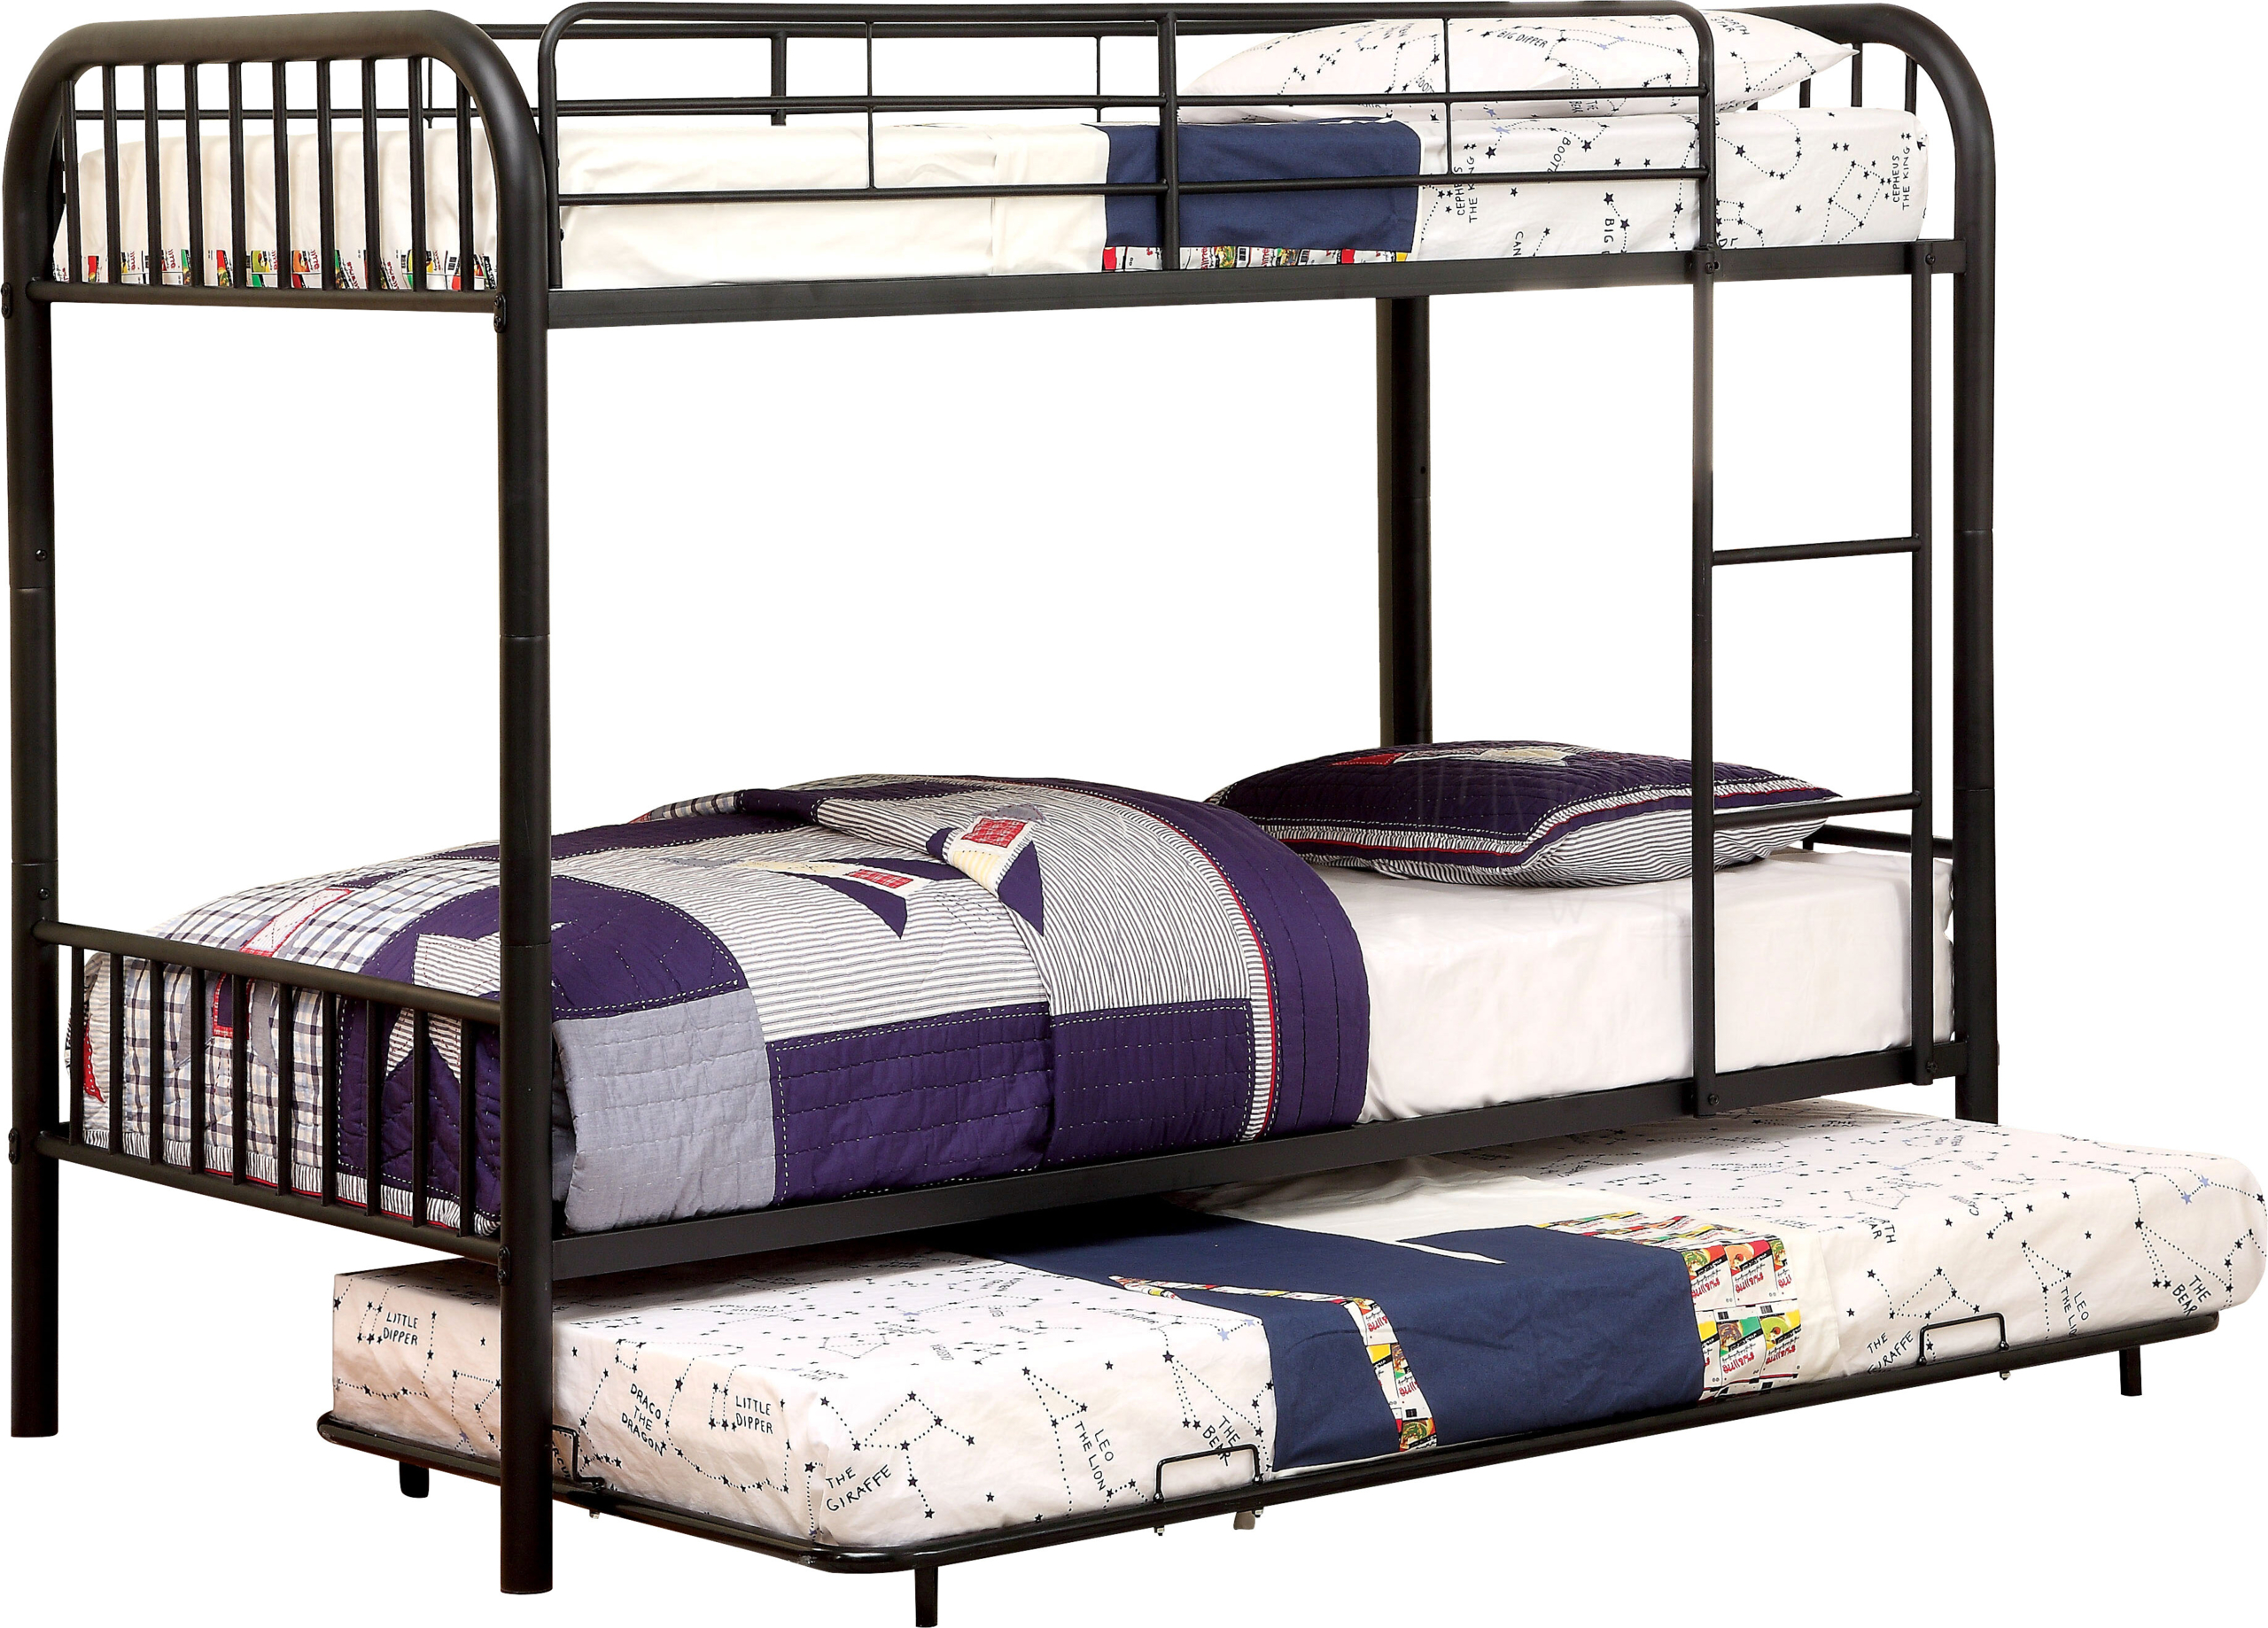 Heavy Duty Bunk Beds Visualhunt, Twin Over King Bed